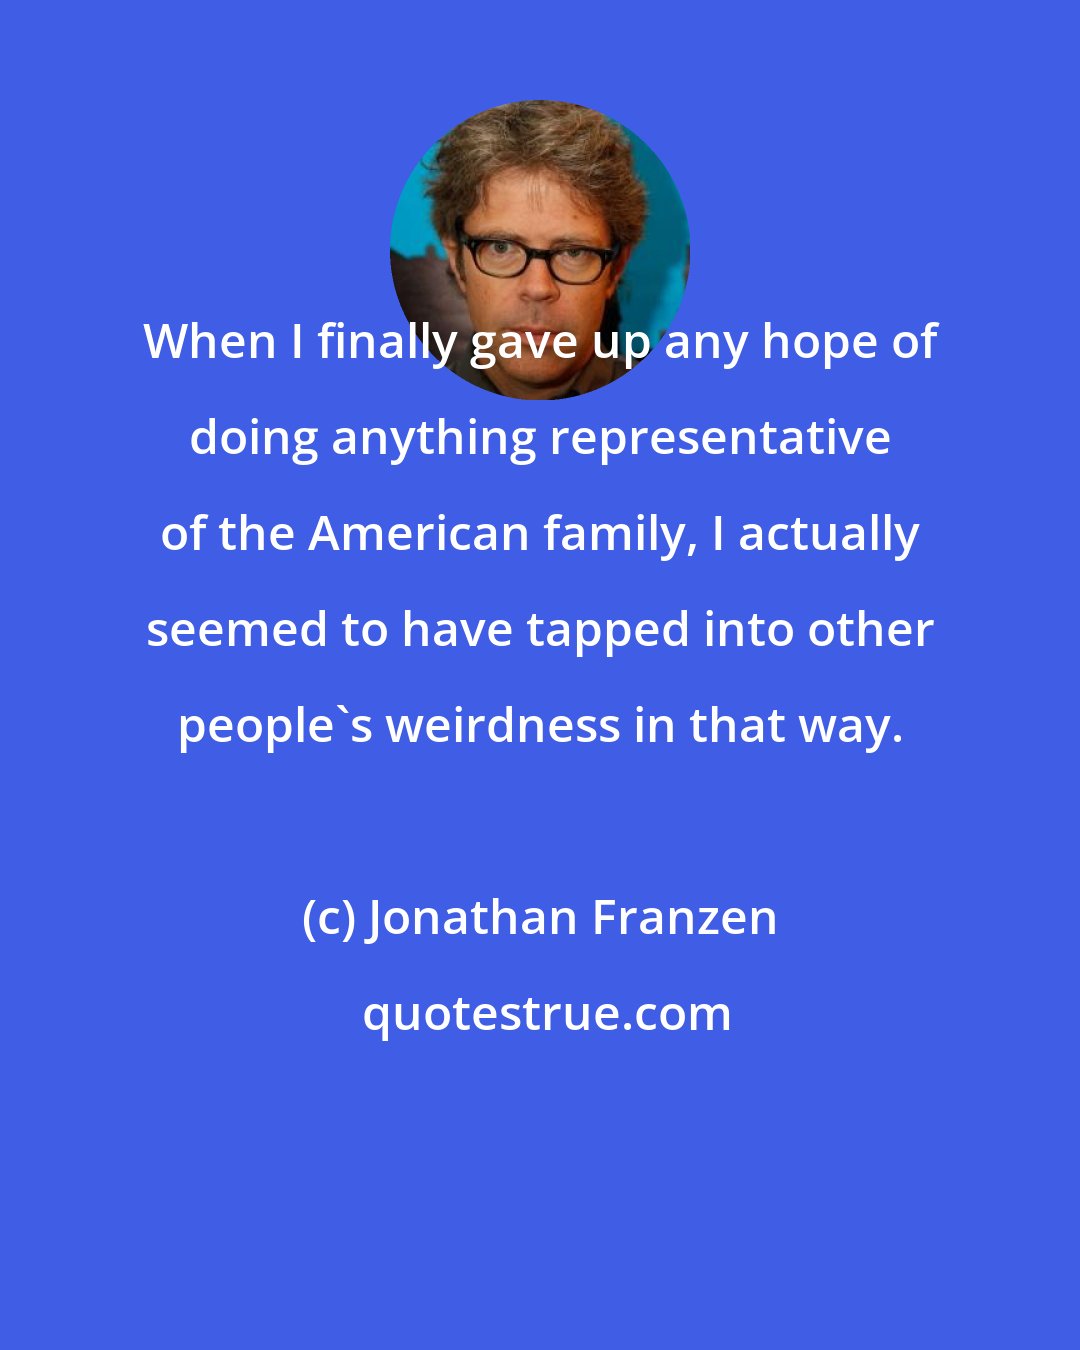 Jonathan Franzen: When I finally gave up any hope of doing anything representative of the American family, I actually seemed to have tapped into other people's weirdness in that way.